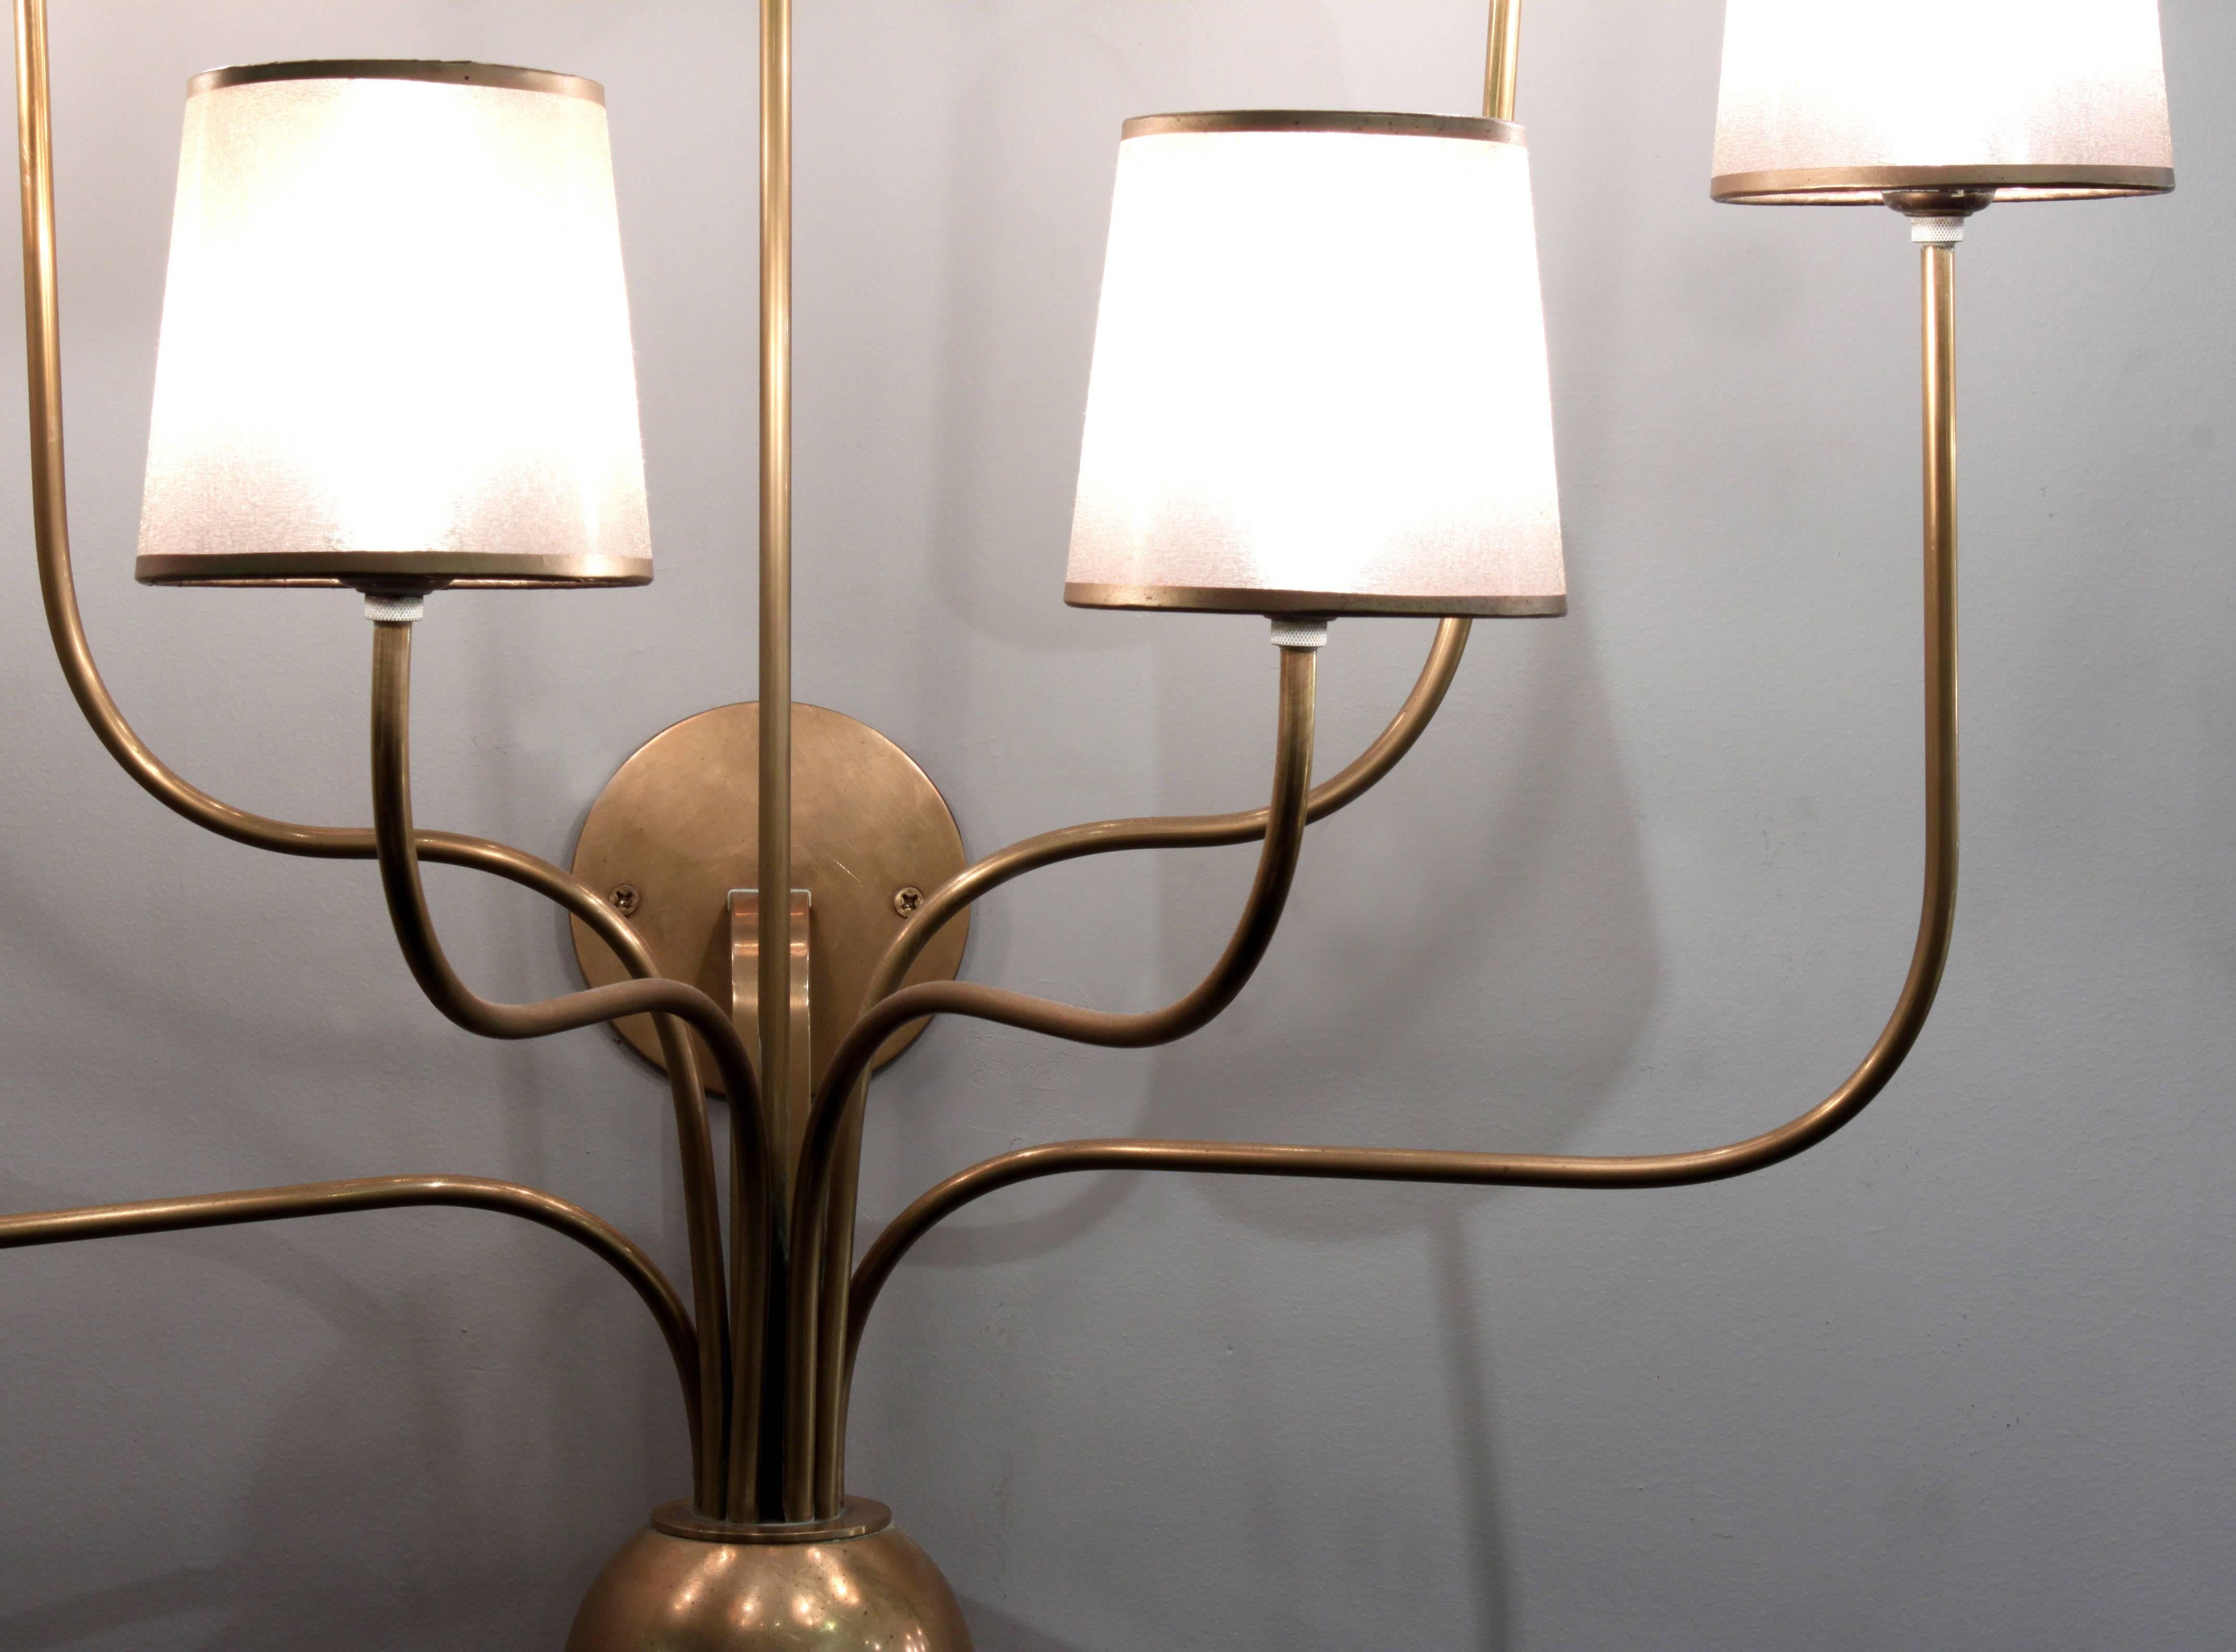 Pair of 7 arm sconces in brass, American 1990's.  The scale of these sconces makes them impressive and very chic.